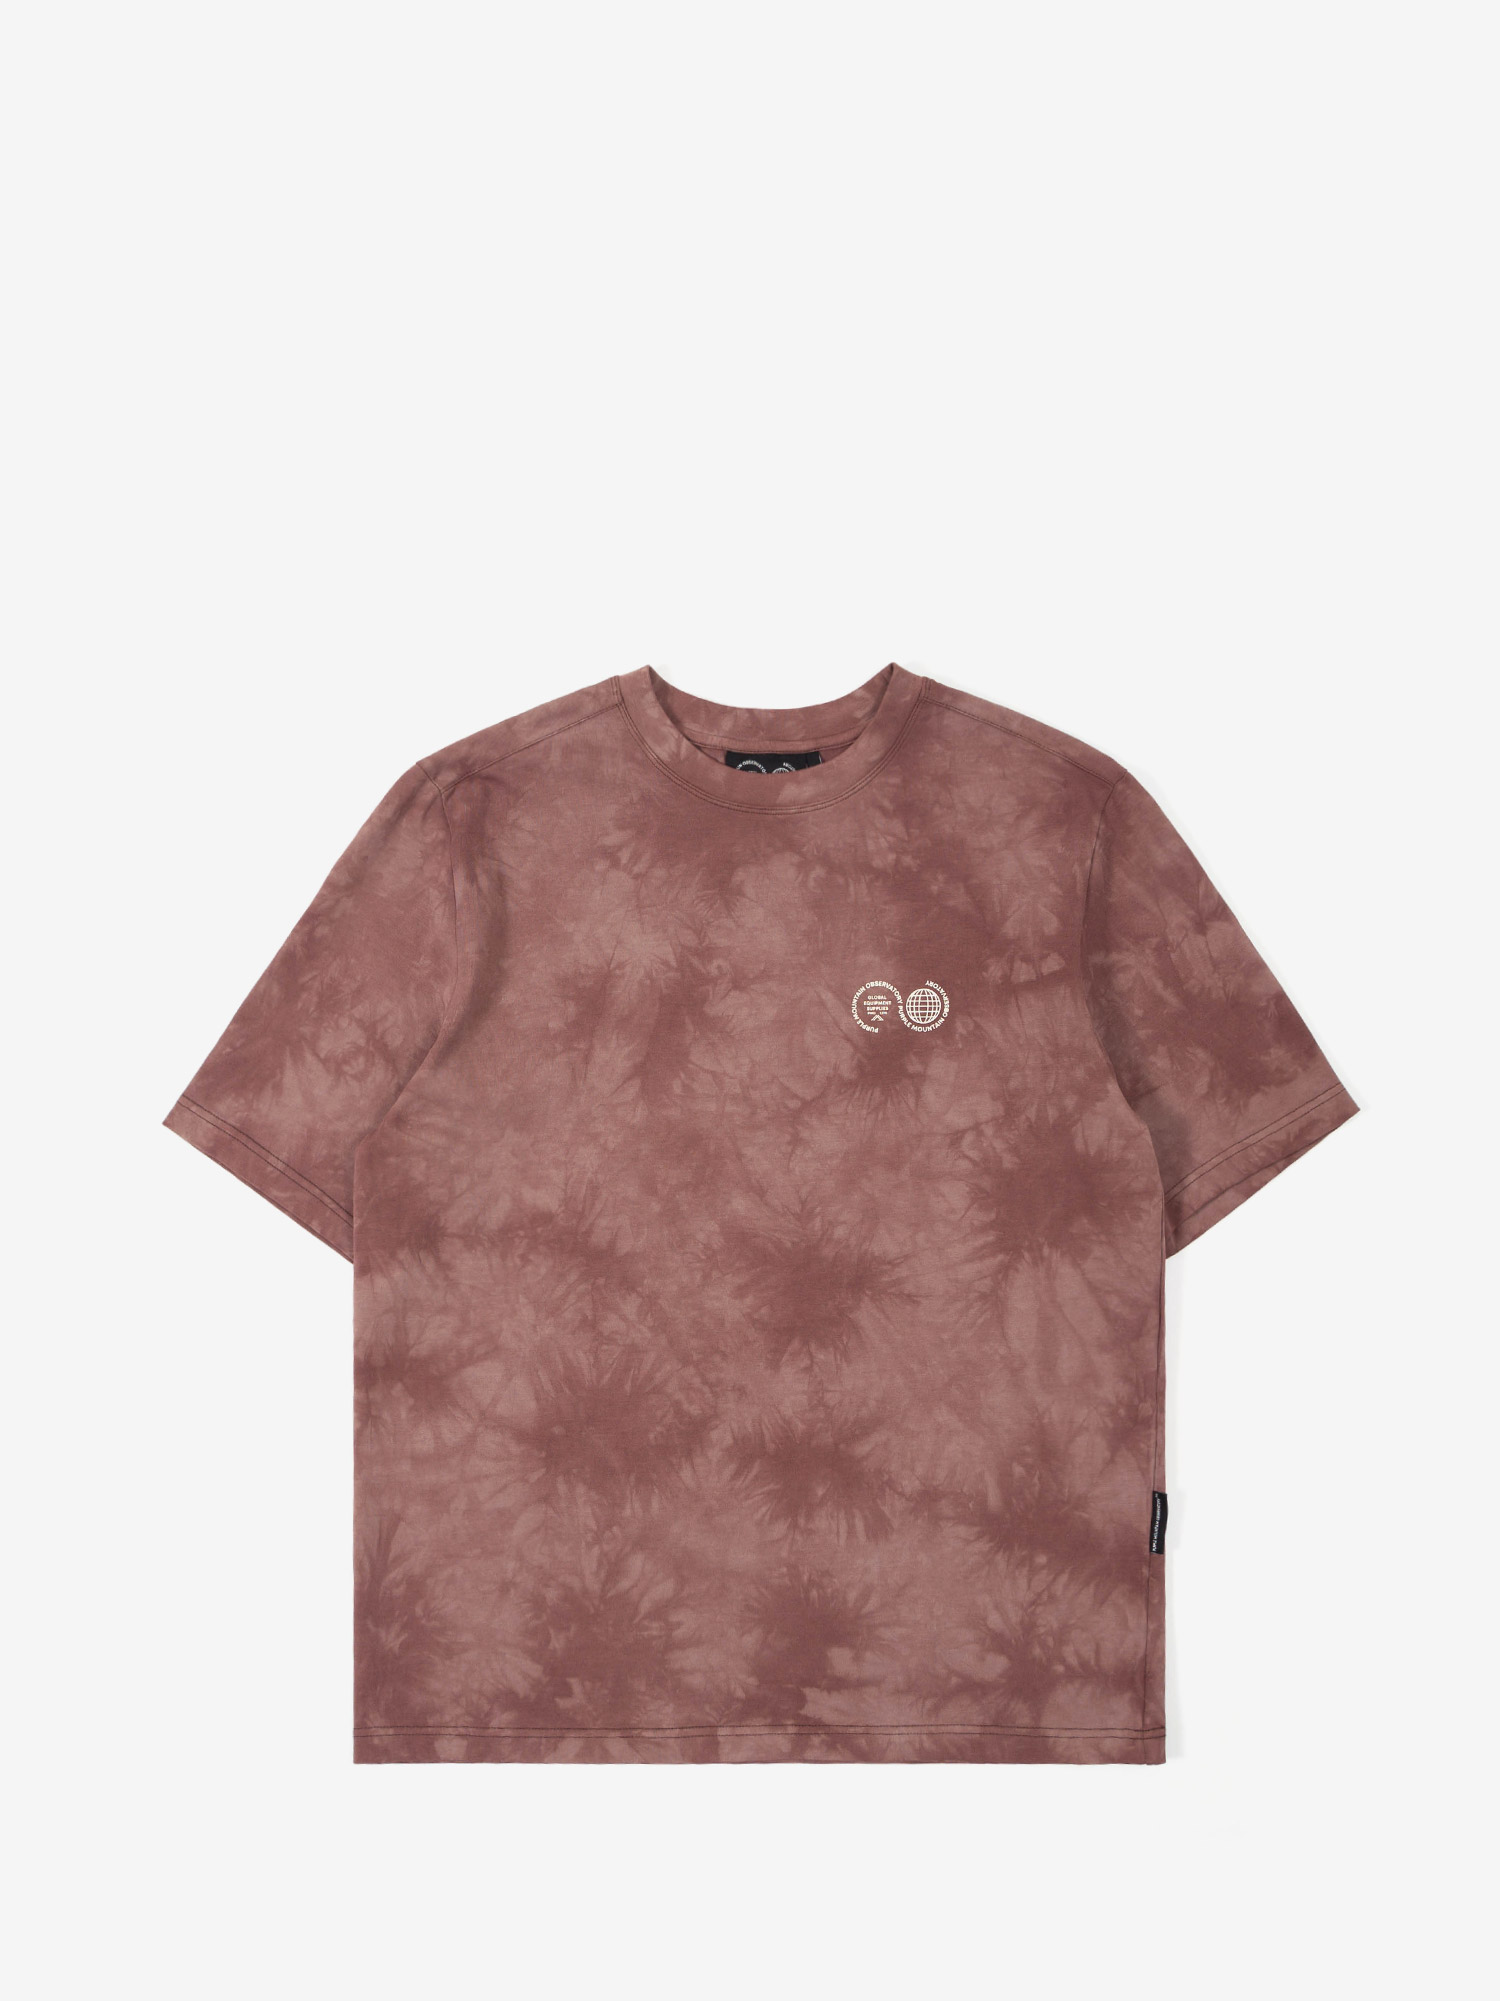 Featured image for “PMO TIE DYE SHORT SLEEVE T-SHIRT CHOCOLATE”